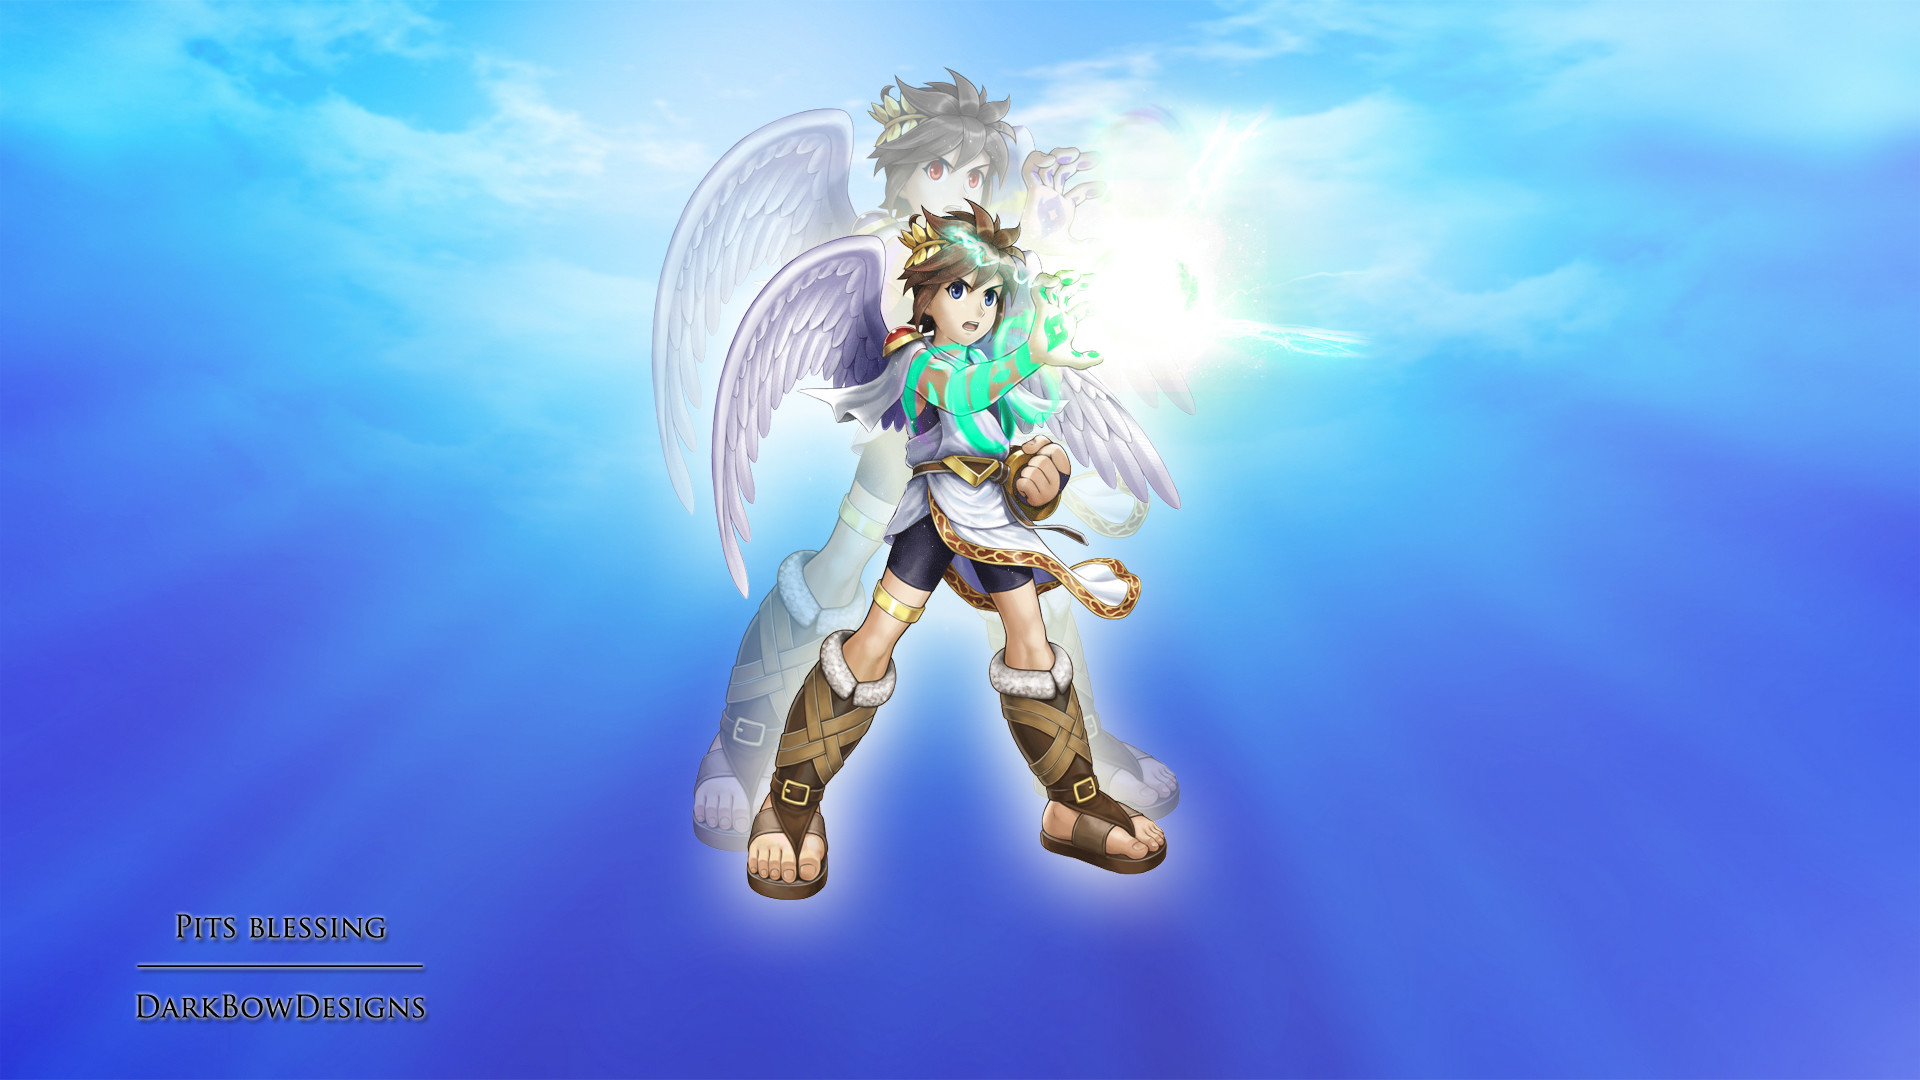 1920x1080 ... Pits Blessing [Kid Icarus: Uprising] by DarkBowDesigns